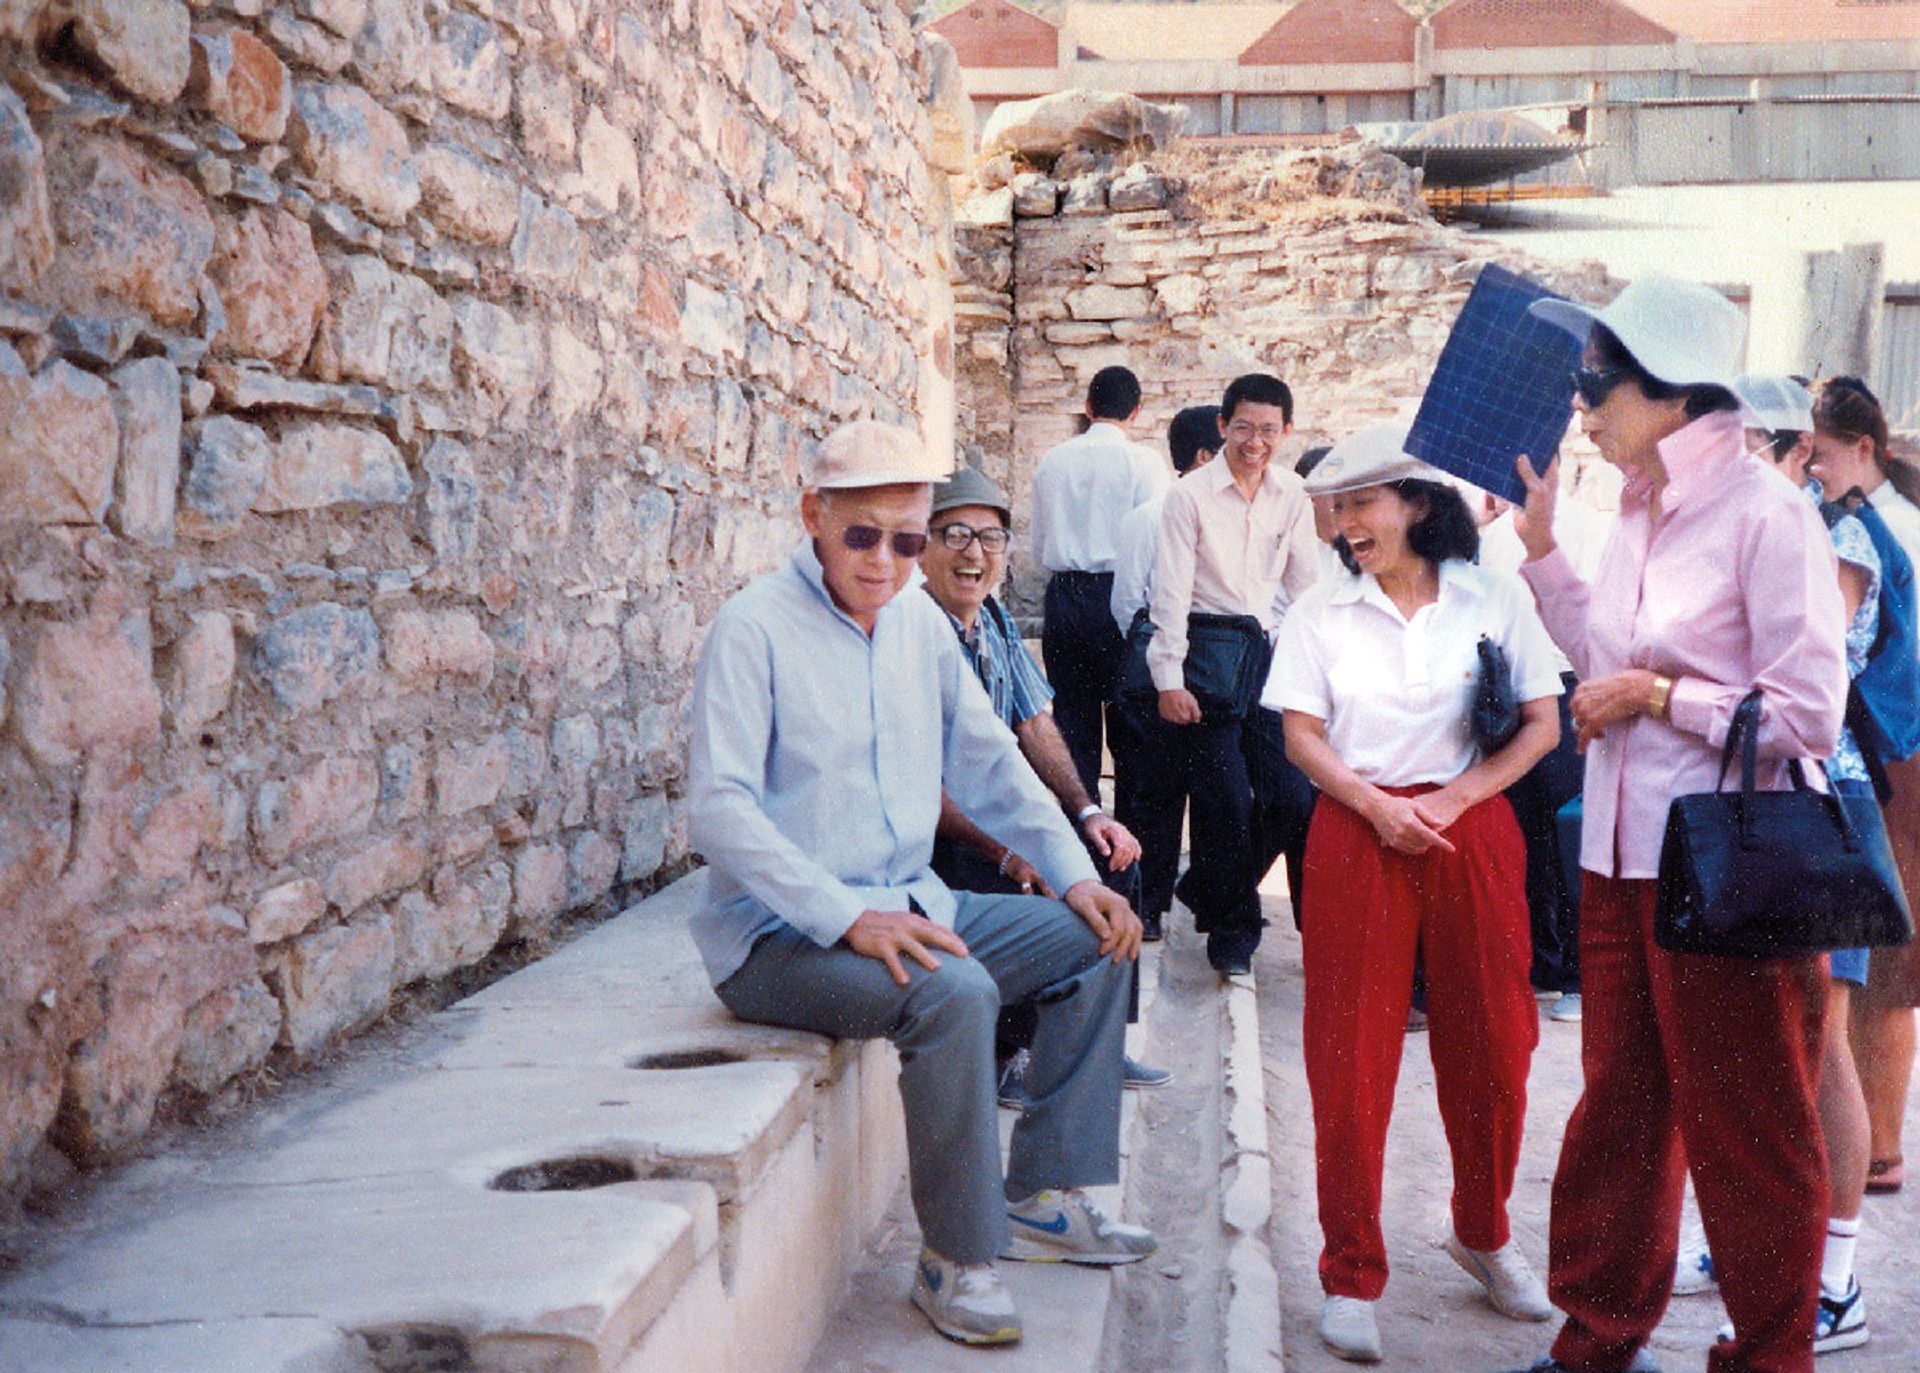 Getting a feel for the ancient public toilets in Turkey, Mr Lee amuses Mrs Lee (right); Ms Ling Siew May (second from right), wife of Deputy Prime Minister Ong Teng Cheong; and other Singapore officials during his visit to the republic in September 1991. Source: Lee Kuan Yew